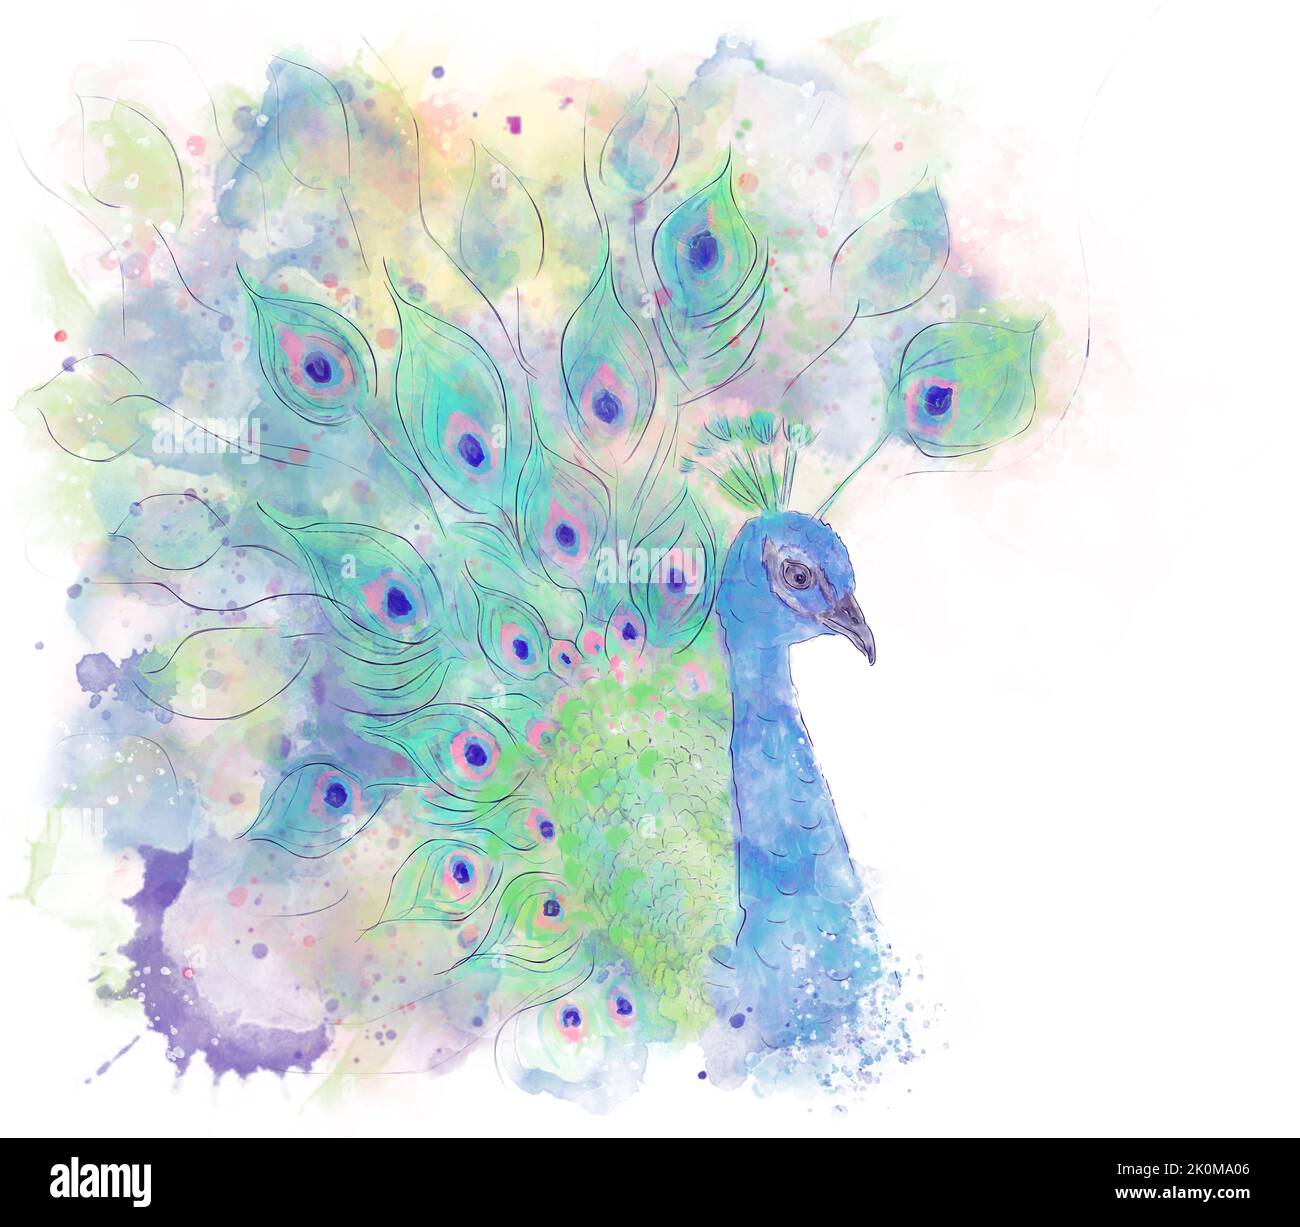 Watercolor Digital Painting of Peacock on White Background Stock Photo